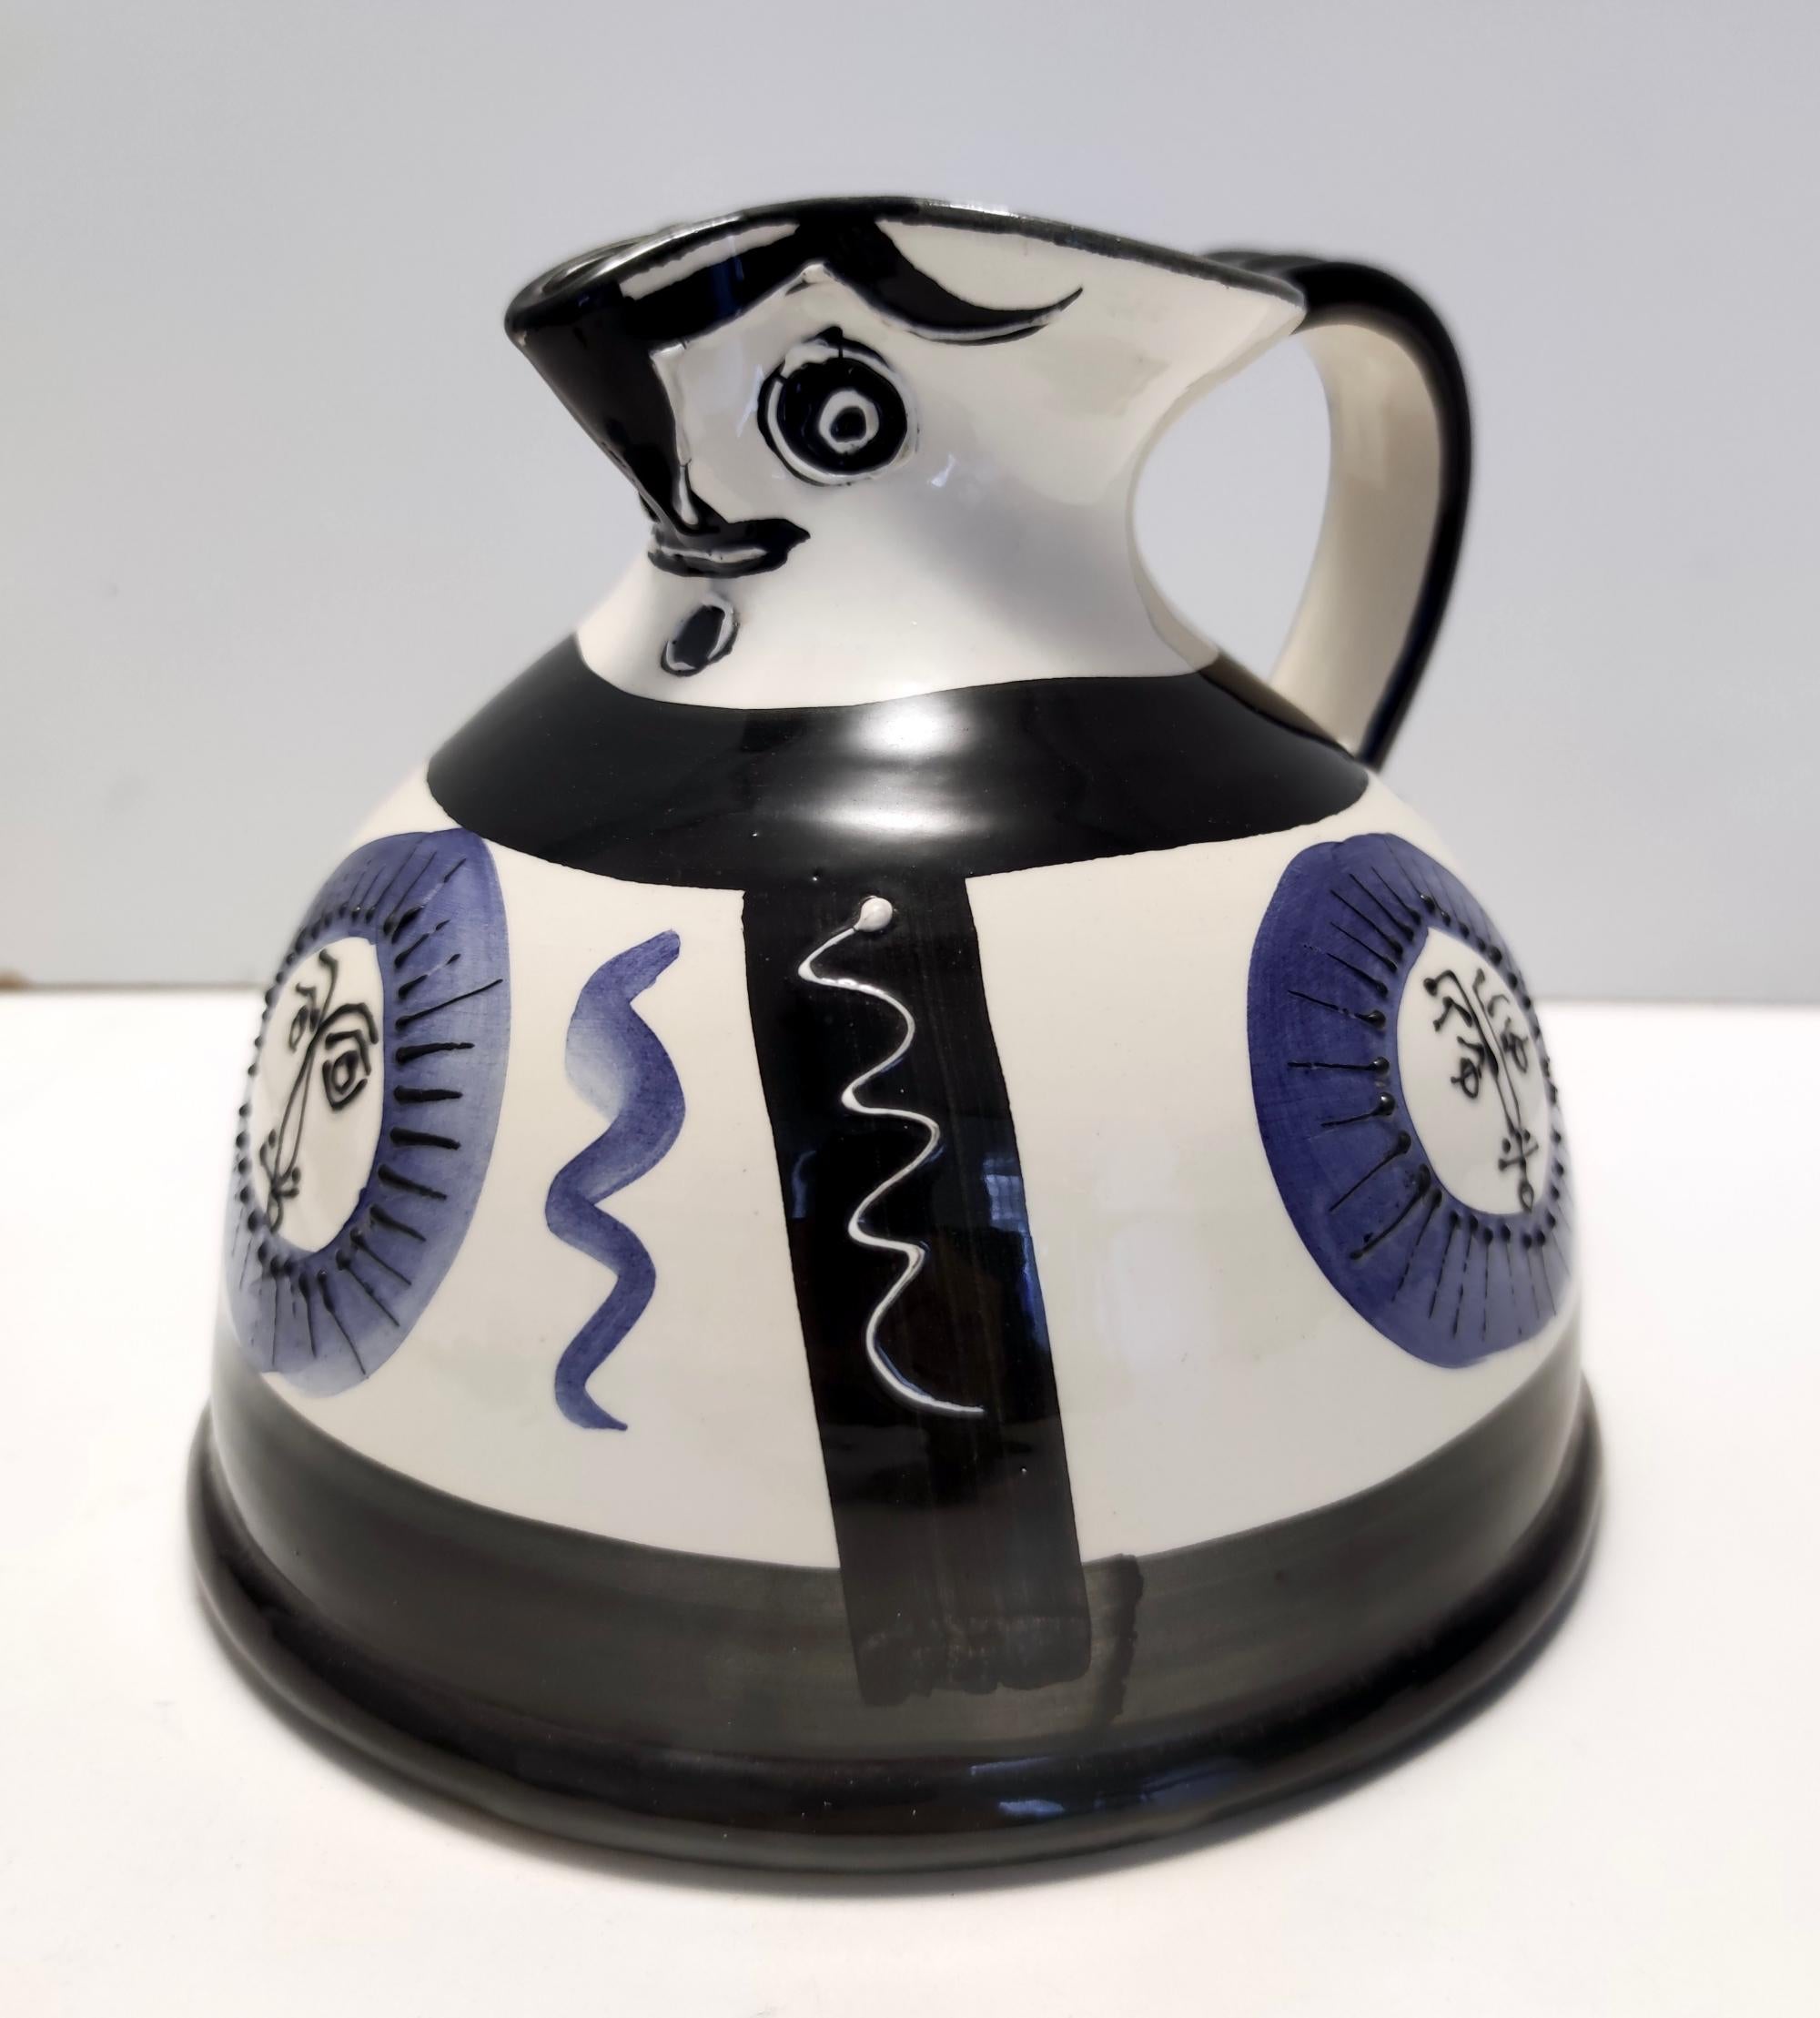 White, Black and Blue Hand-Painted Ceramic Jug / Vase in the Style of Picasso In Excellent Condition For Sale In Bresso, Lombardy